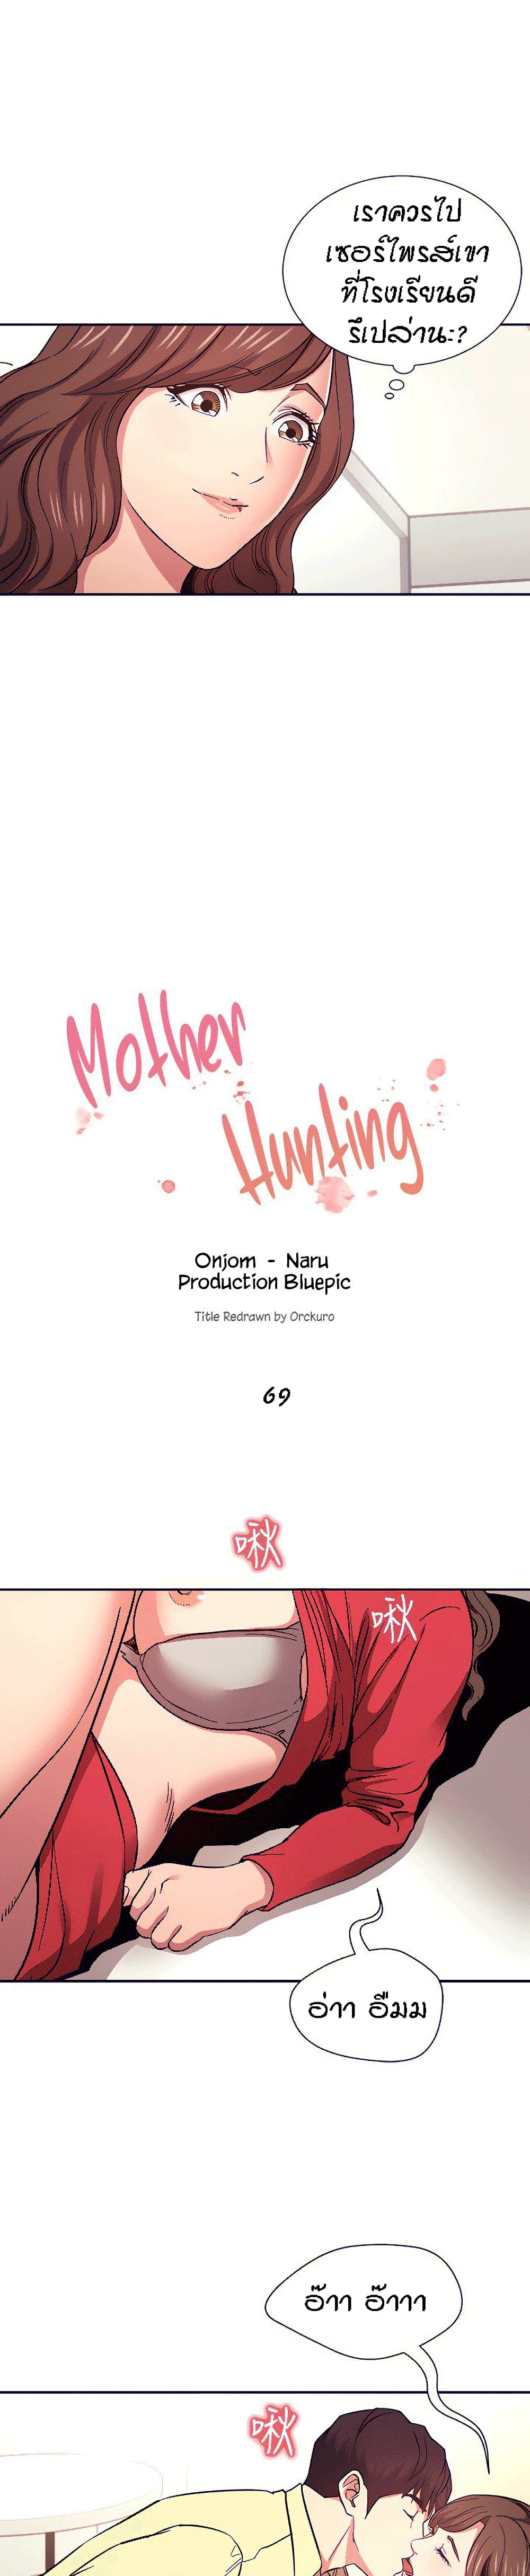 Mother Hunting 69-69